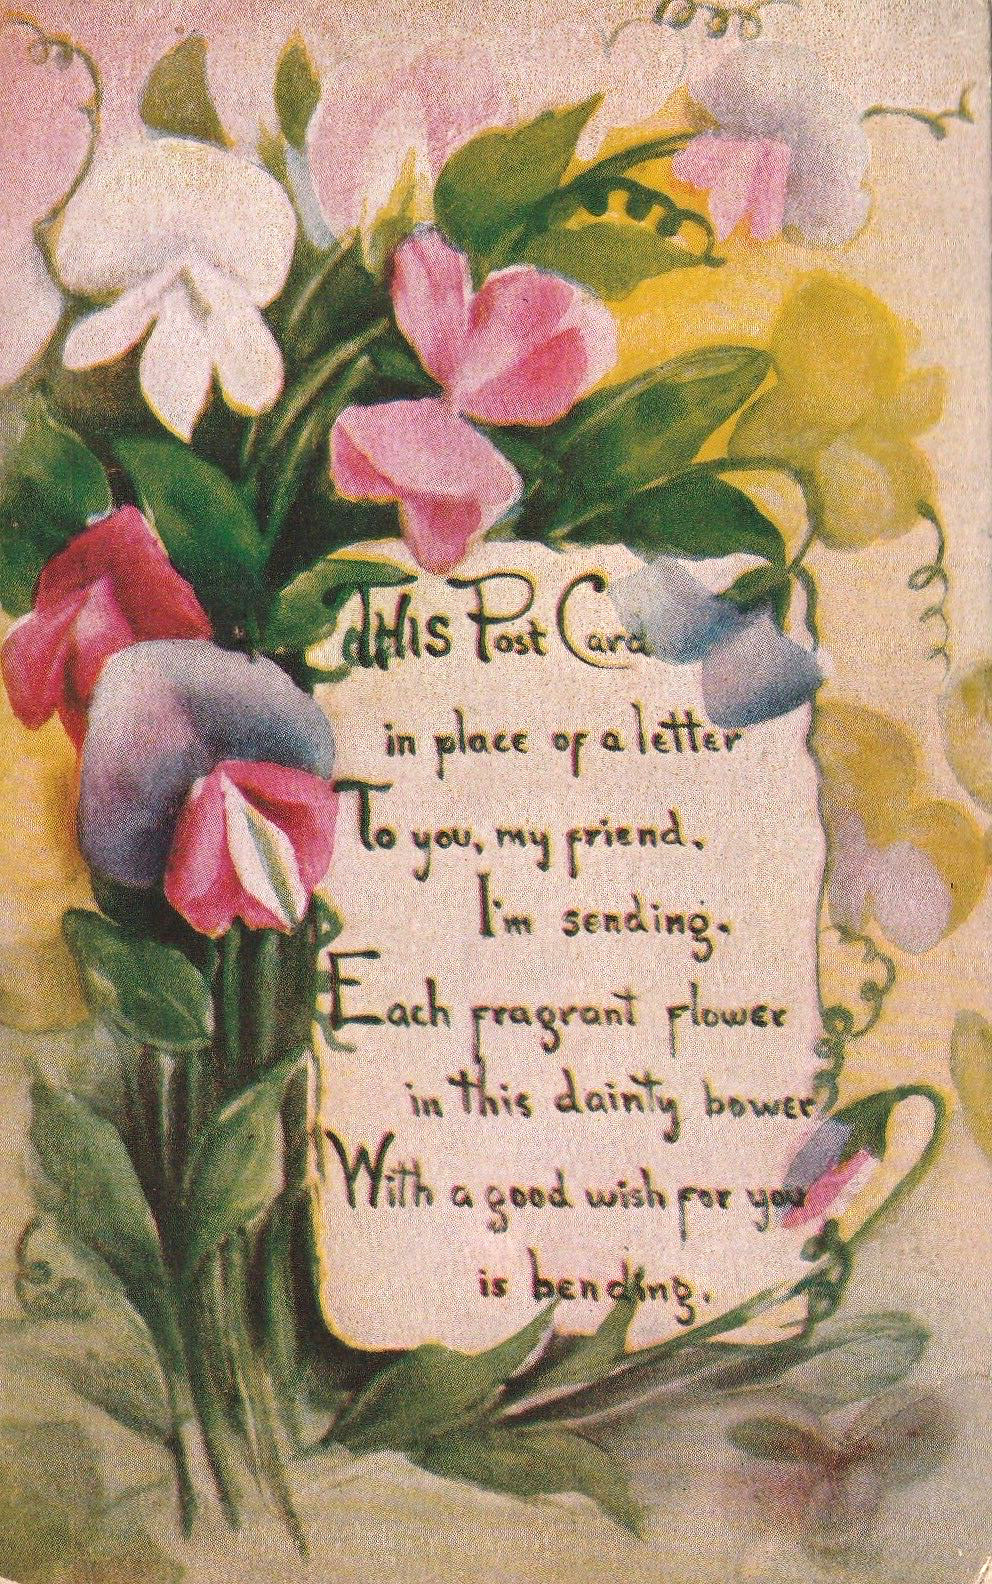 GOOD WISHES FOR YOU POSTCARD 1910 Poem + Flower Bouquet Colorful Antique